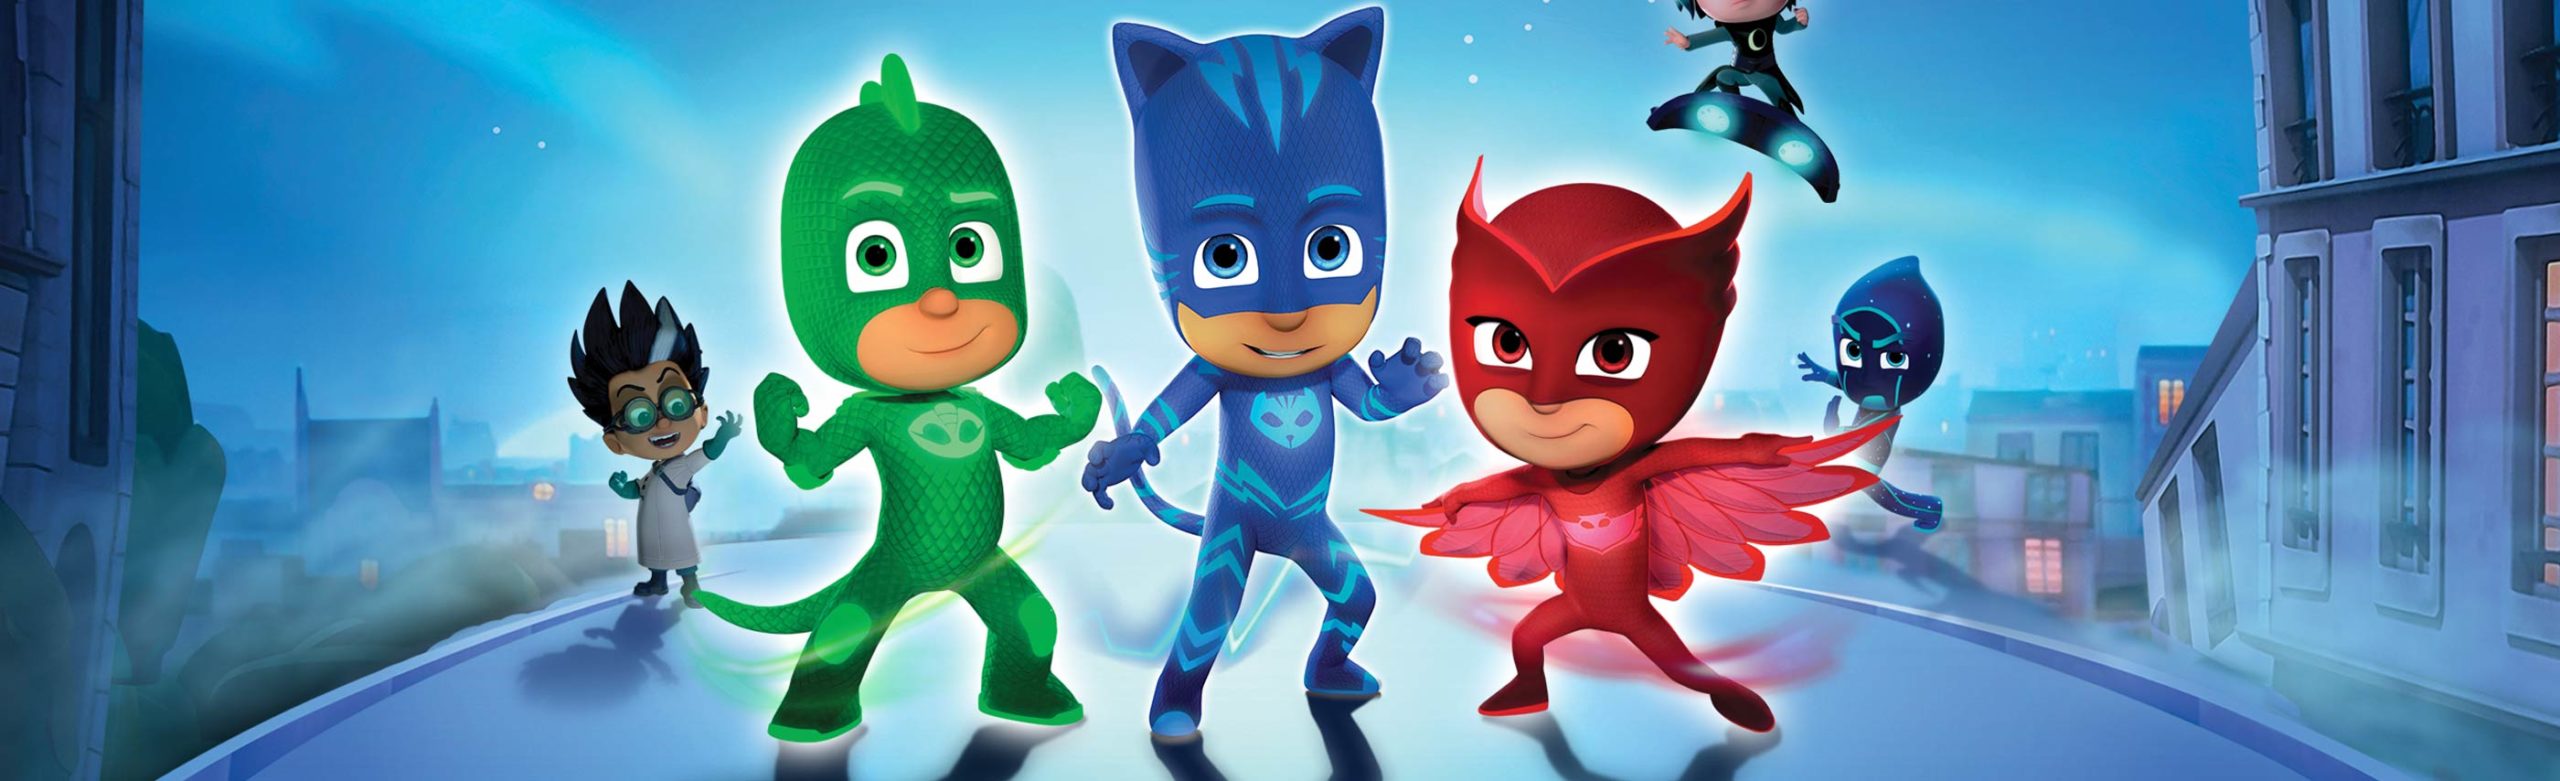 JUST ANNOUNCED: Hit Children’s TV Show “PJ Masks” to Bring Live Action Musical to Missoula Image